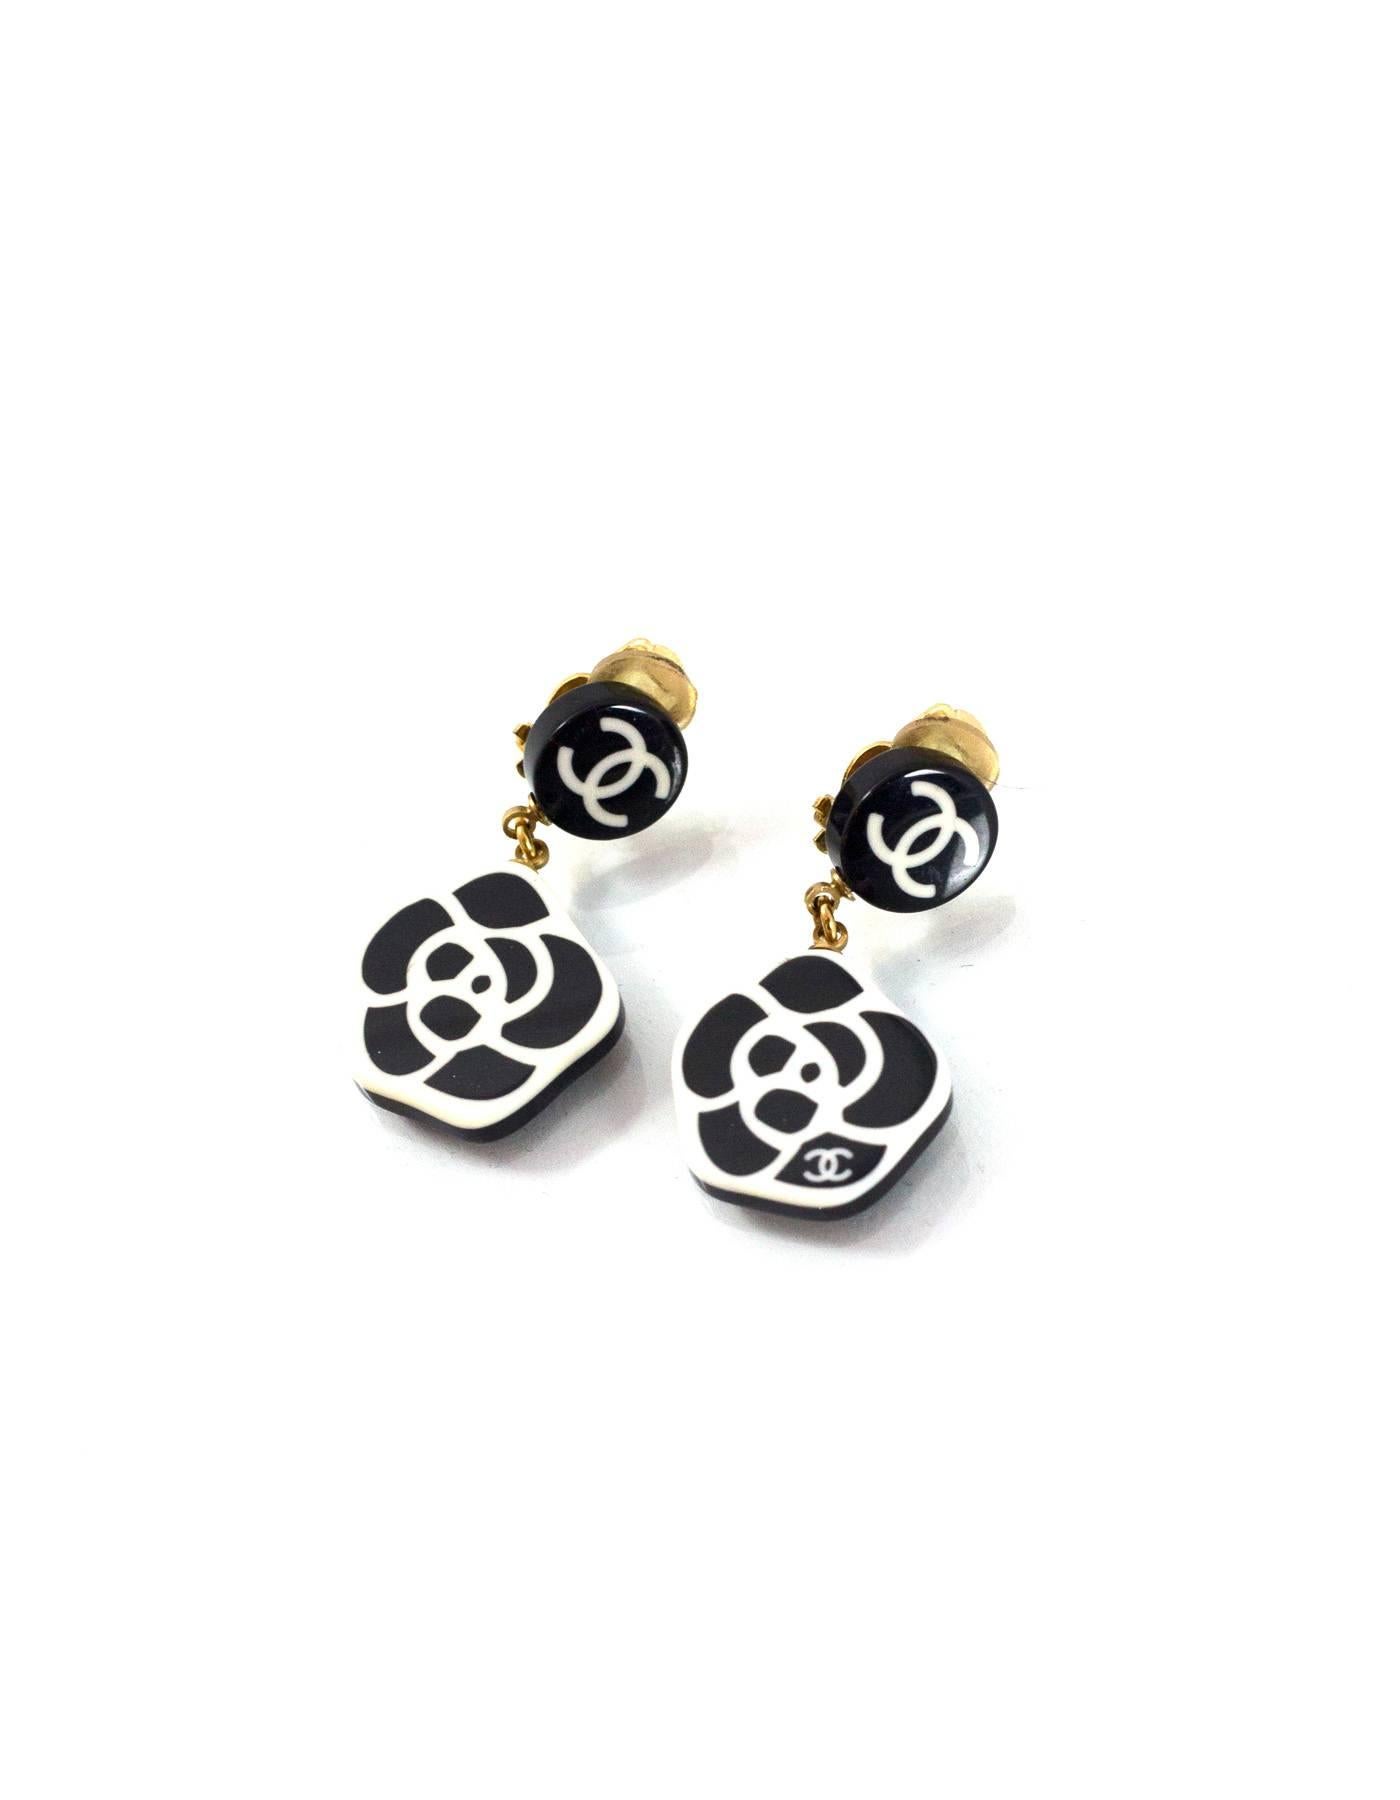 100% Authentic Chanel Black/White Camelia Clip On Earrings. Features resin dangles with white camelia printed on black background. Clip on clasp with CC logo. Includes dust bag. Excellent pre-owned condition with the exception of light scuffs on